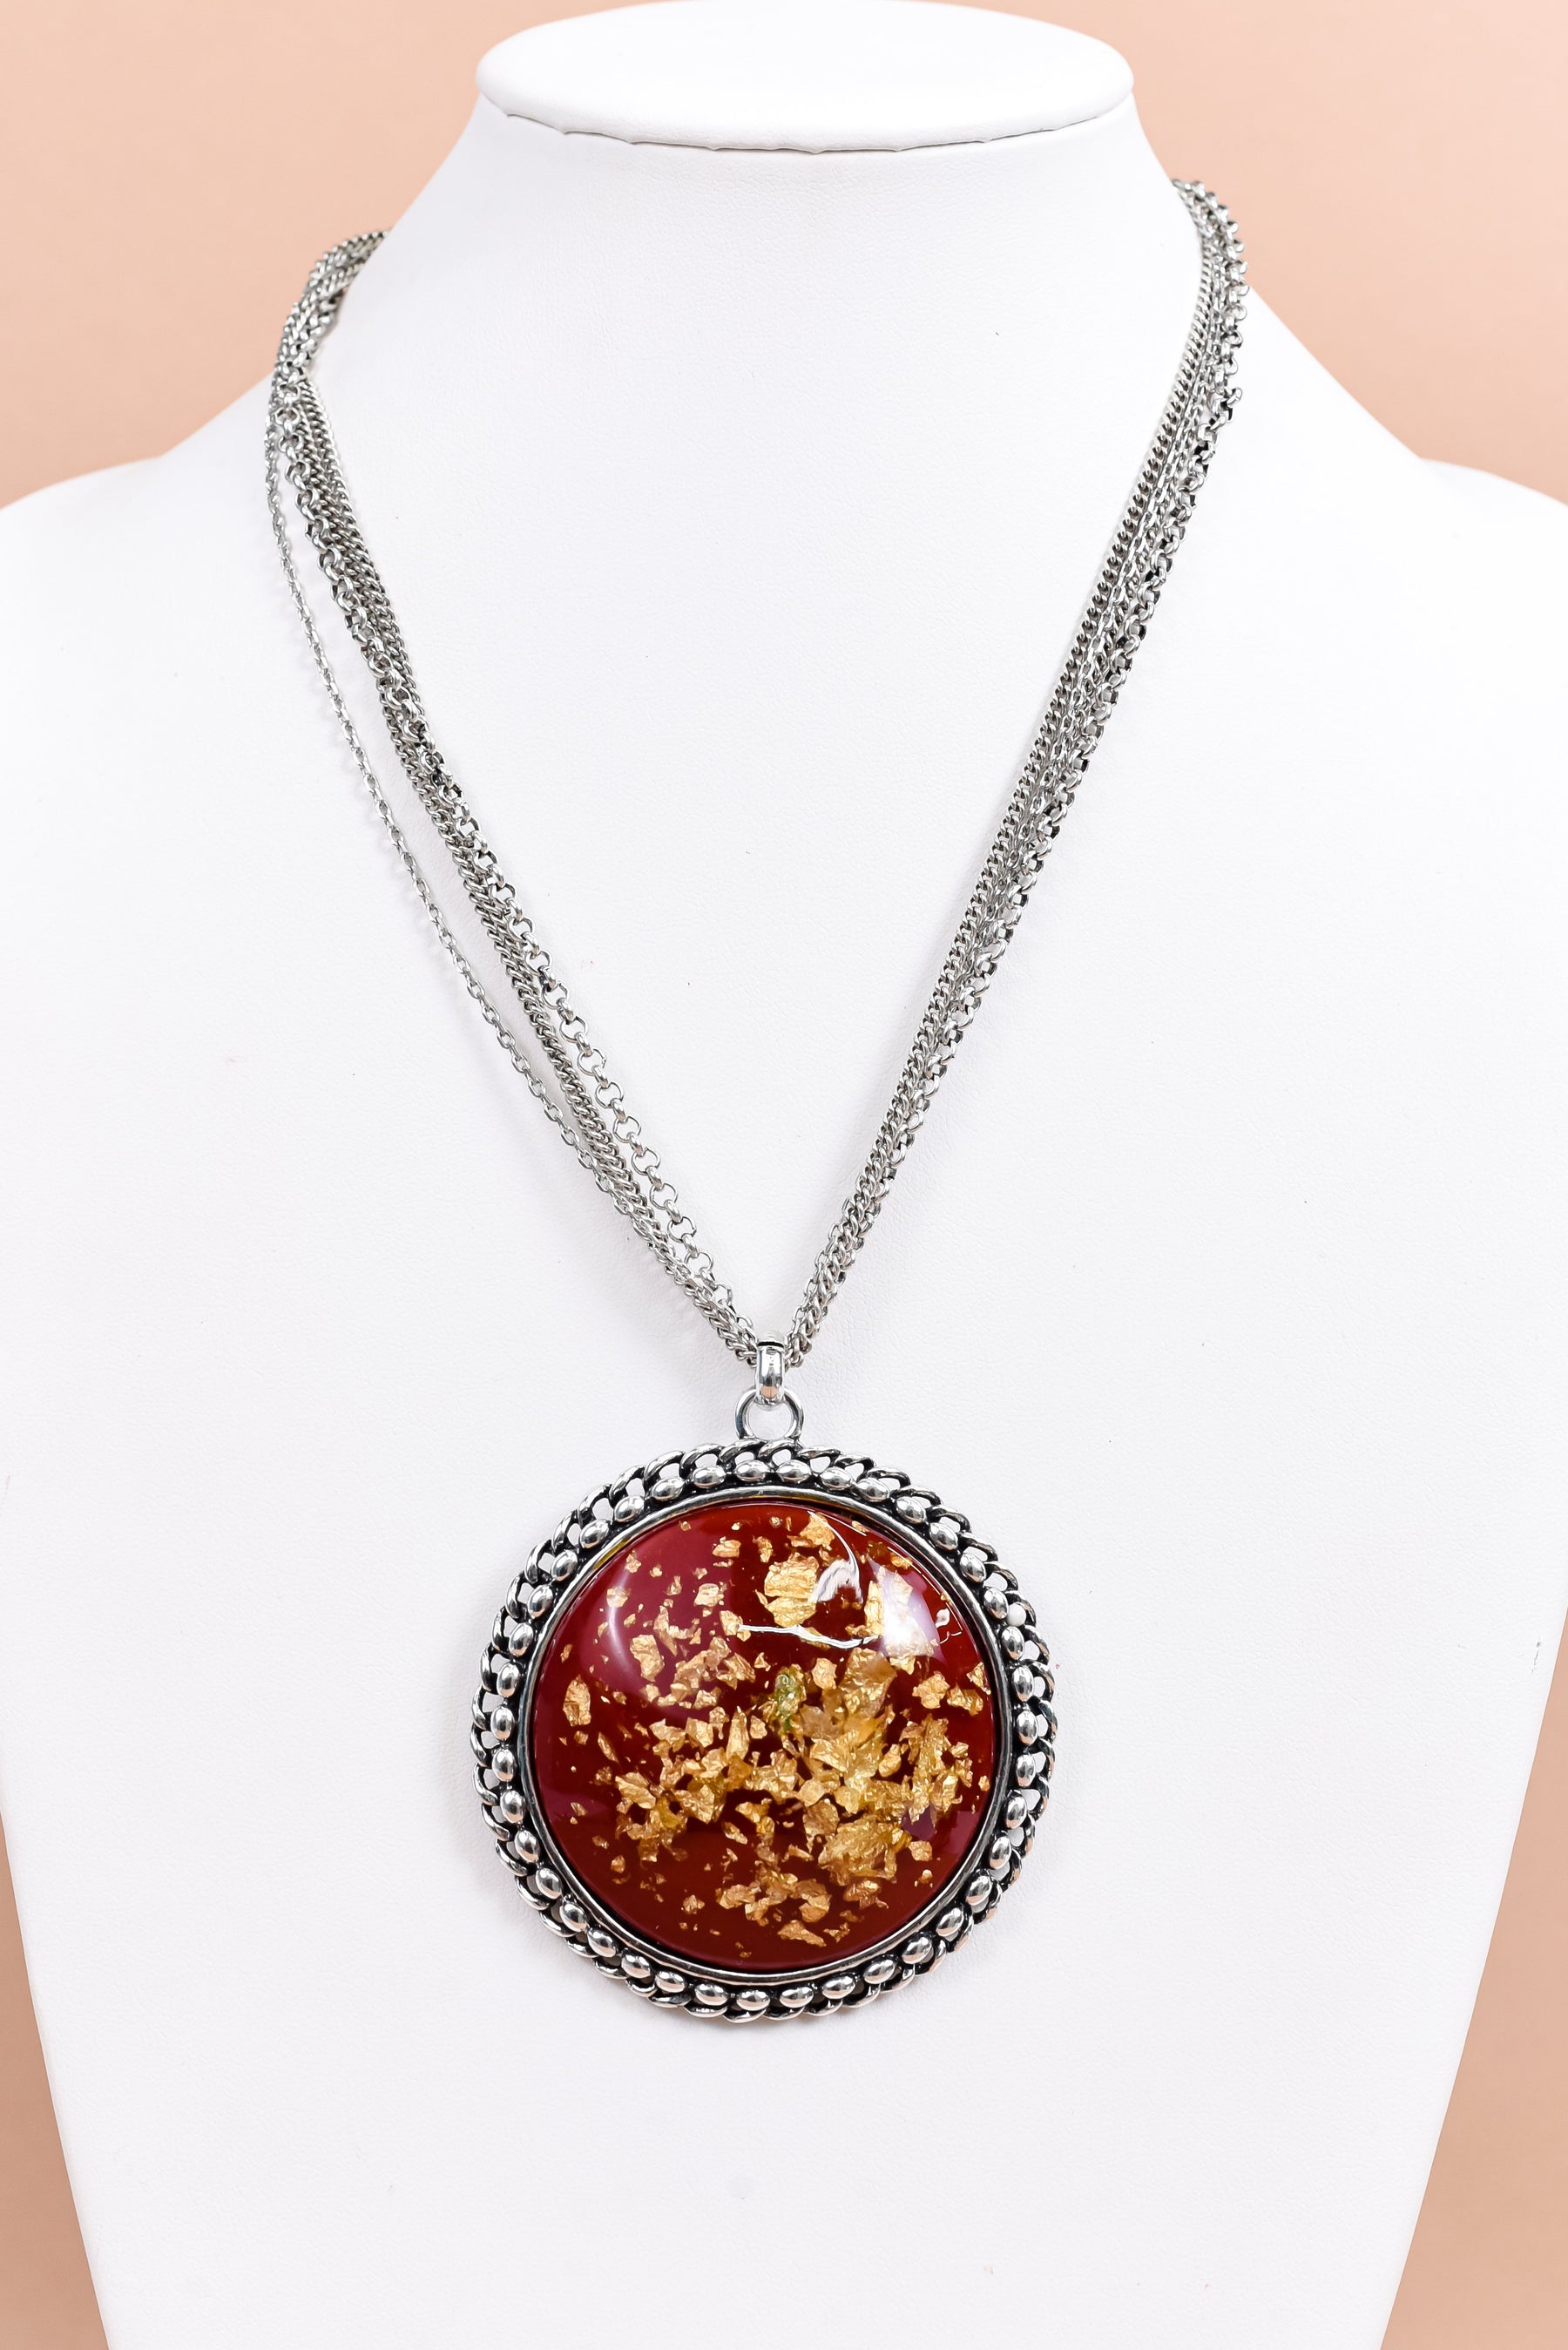 Silver/Red/Gold/Layered/Resin Circle Pendant Necklace - NEK3903RD